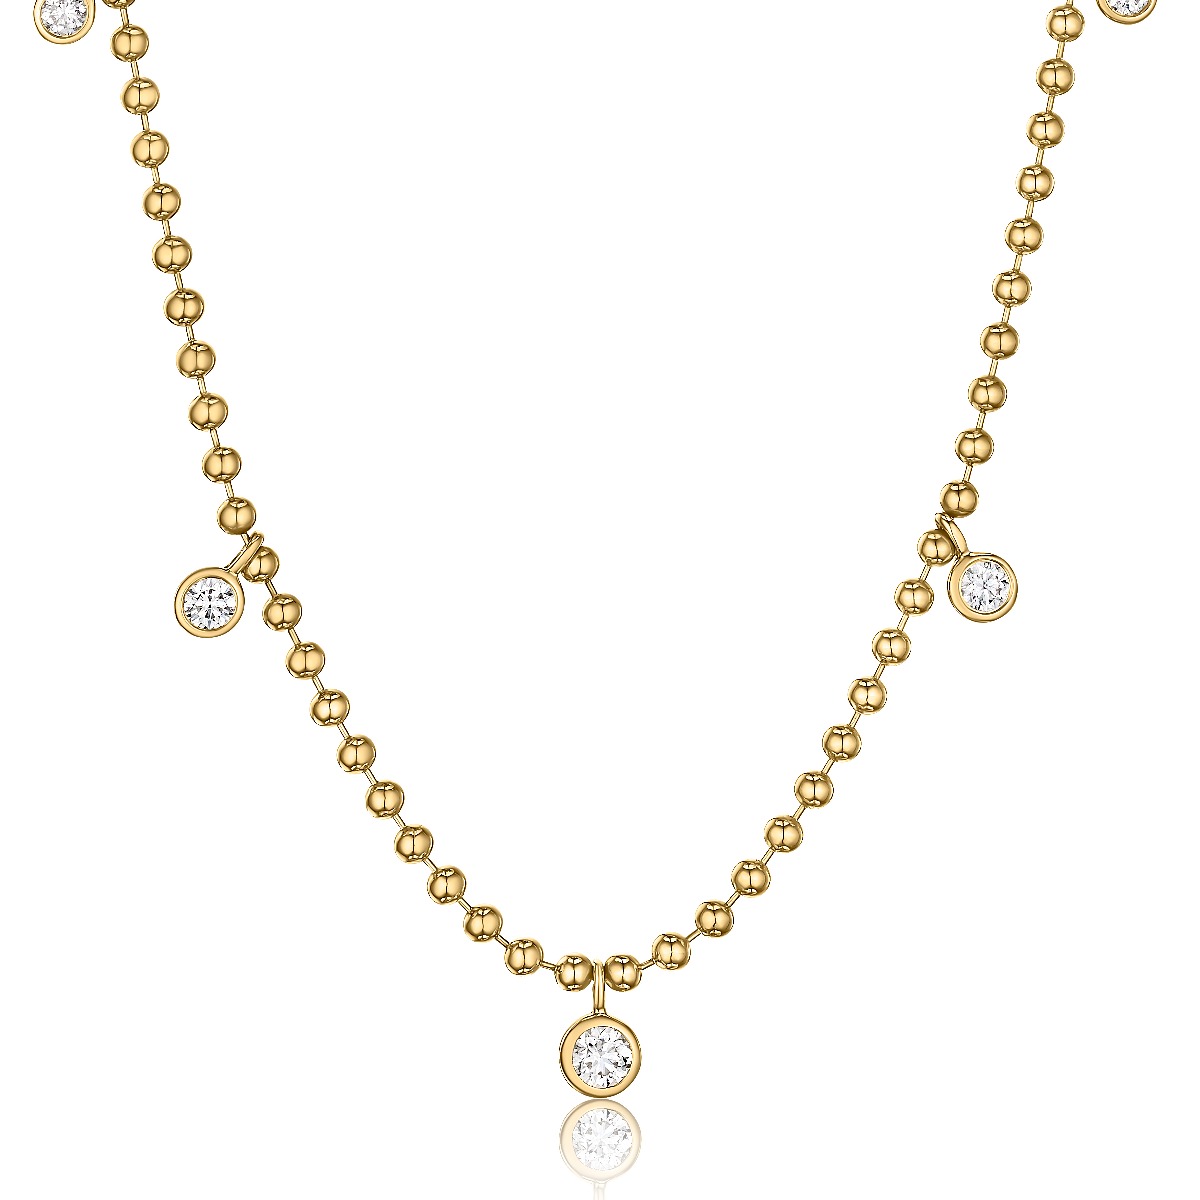 Beaded Gold Chain Necklace with Floating Bezel Round Diamond Motifs